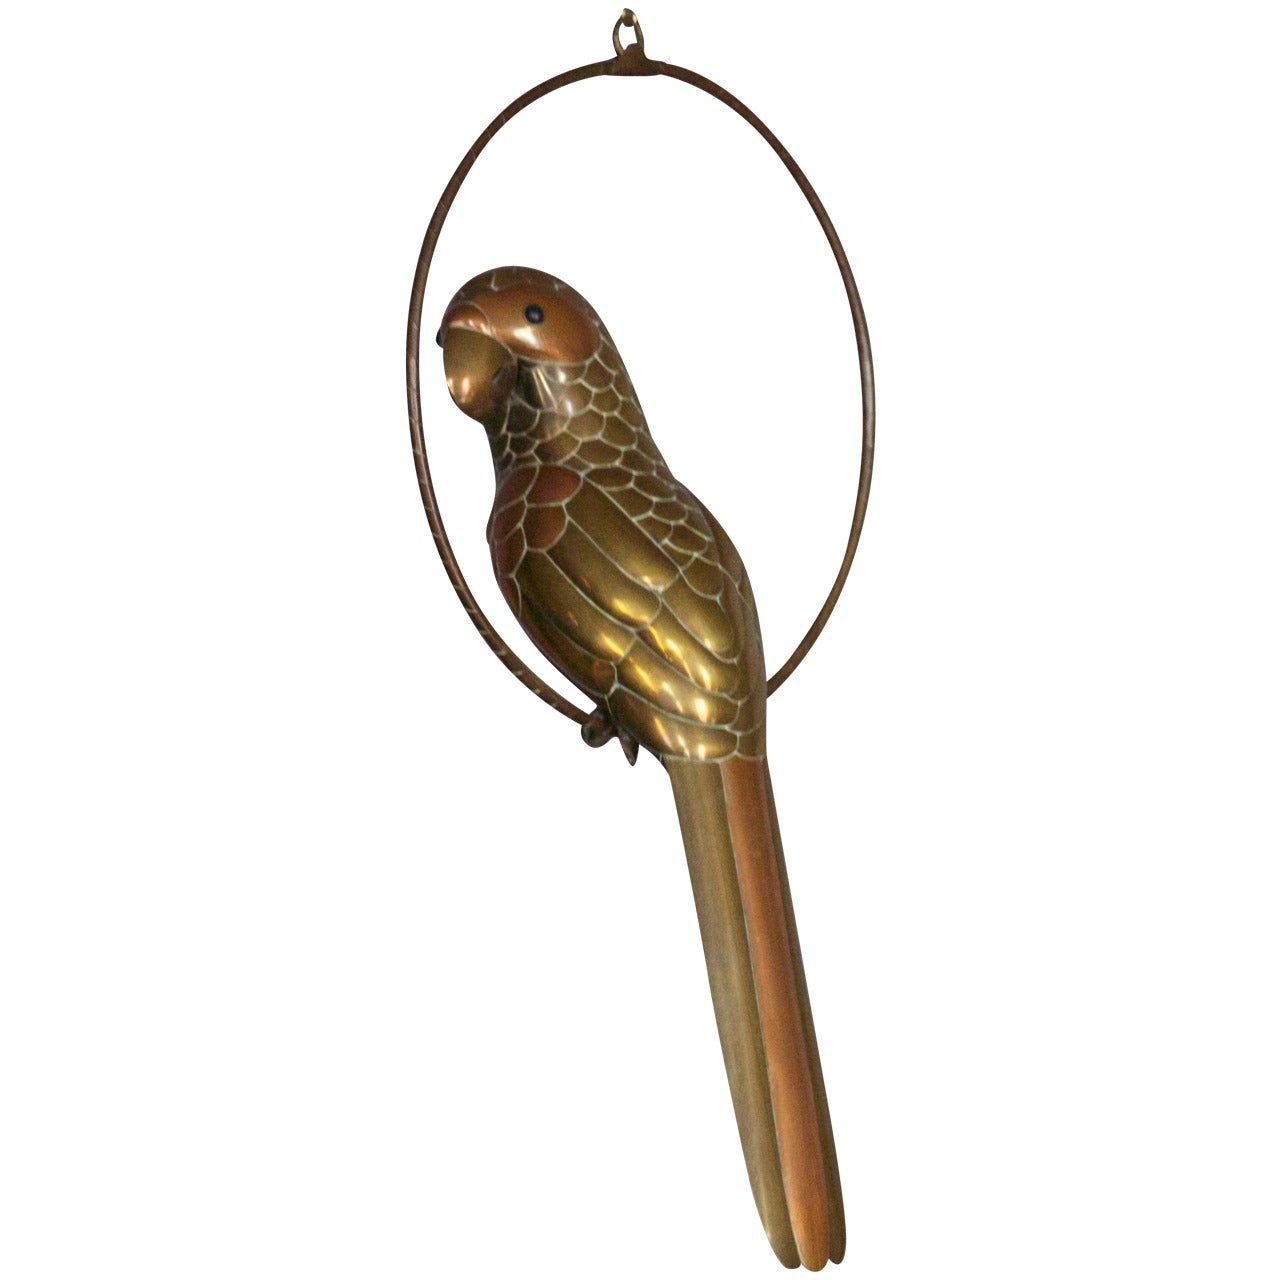 Sergio Bustamante Brass Copper Parrot Sculpture on Circular Stand, 1960s For Sale